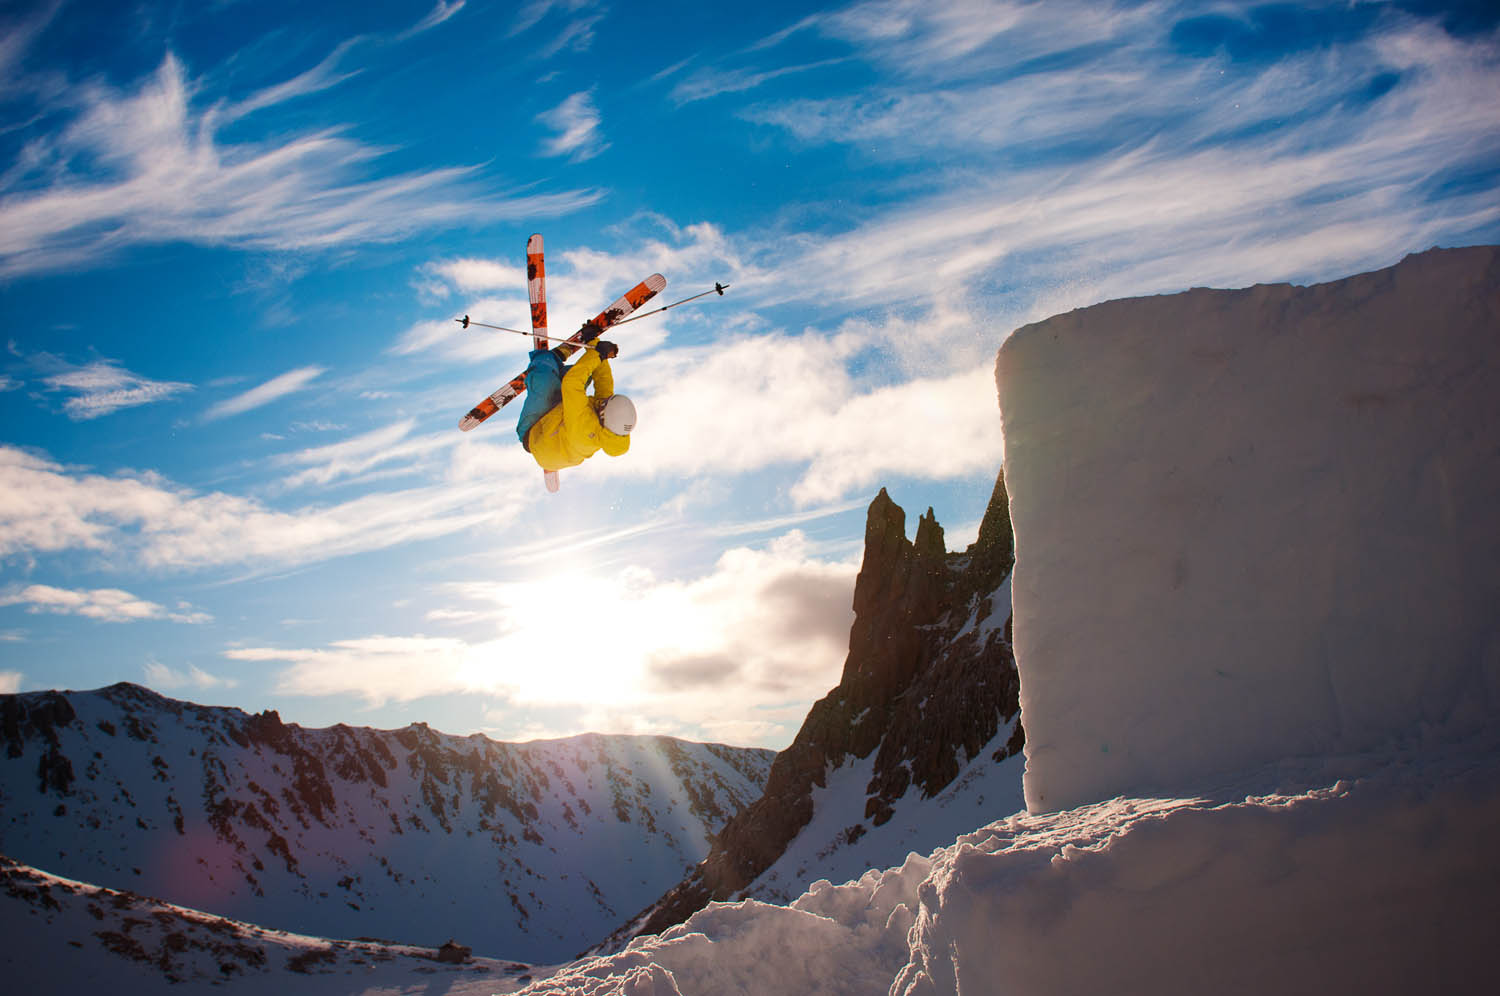 Backcountry Snowboarding HD Wallpaper Led A Back Country Ski